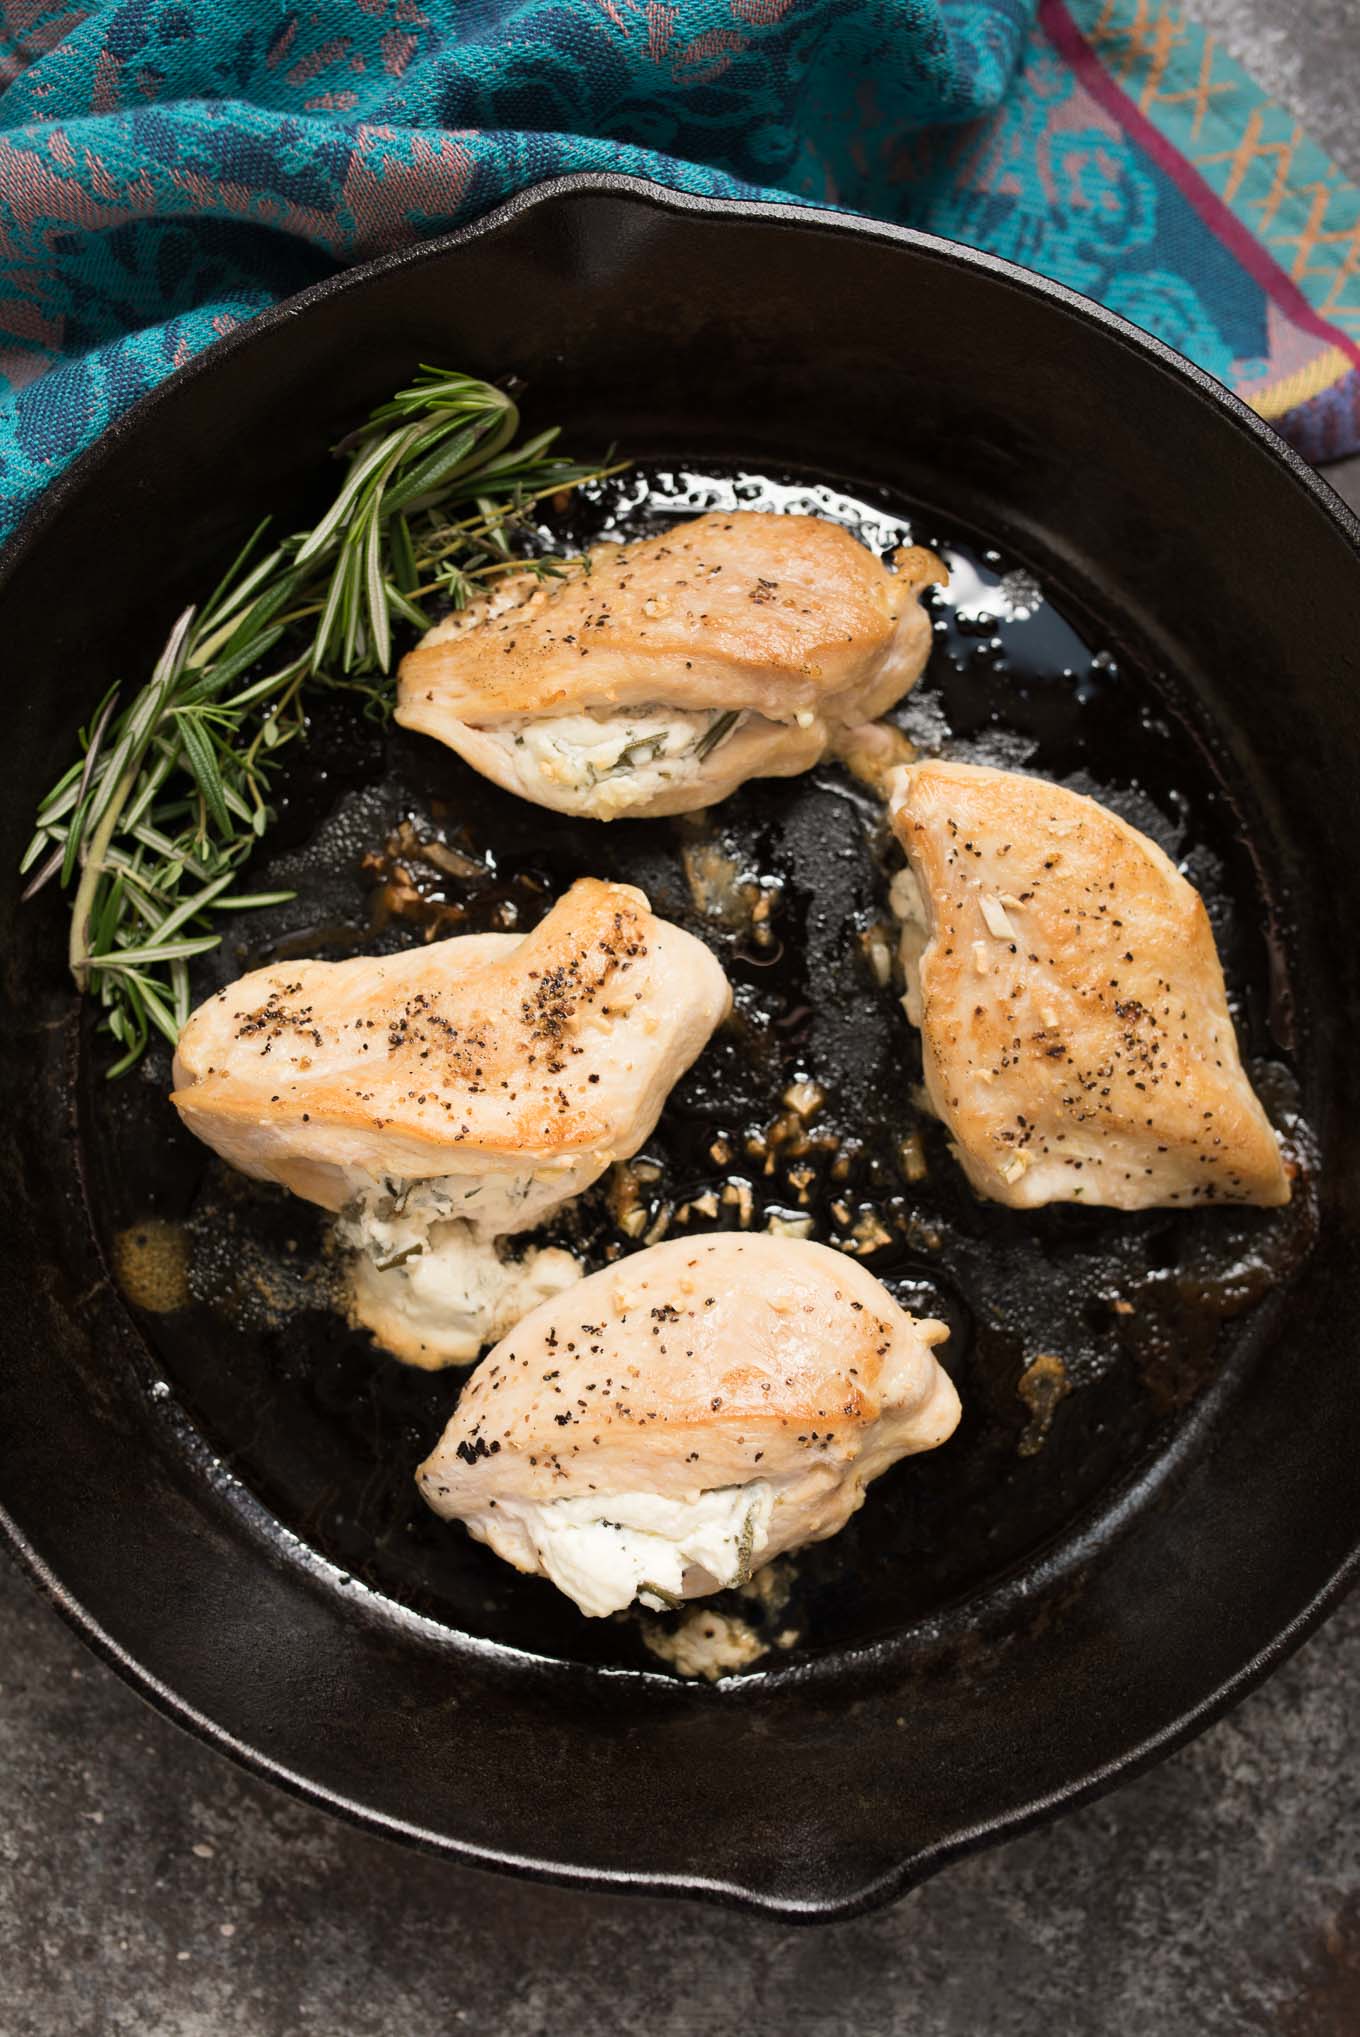 Goat Cheese and Herb Stuffed Chicken Breasts are simple yet fancy...a great dinner for date night, a dinner party or holiday meal. 